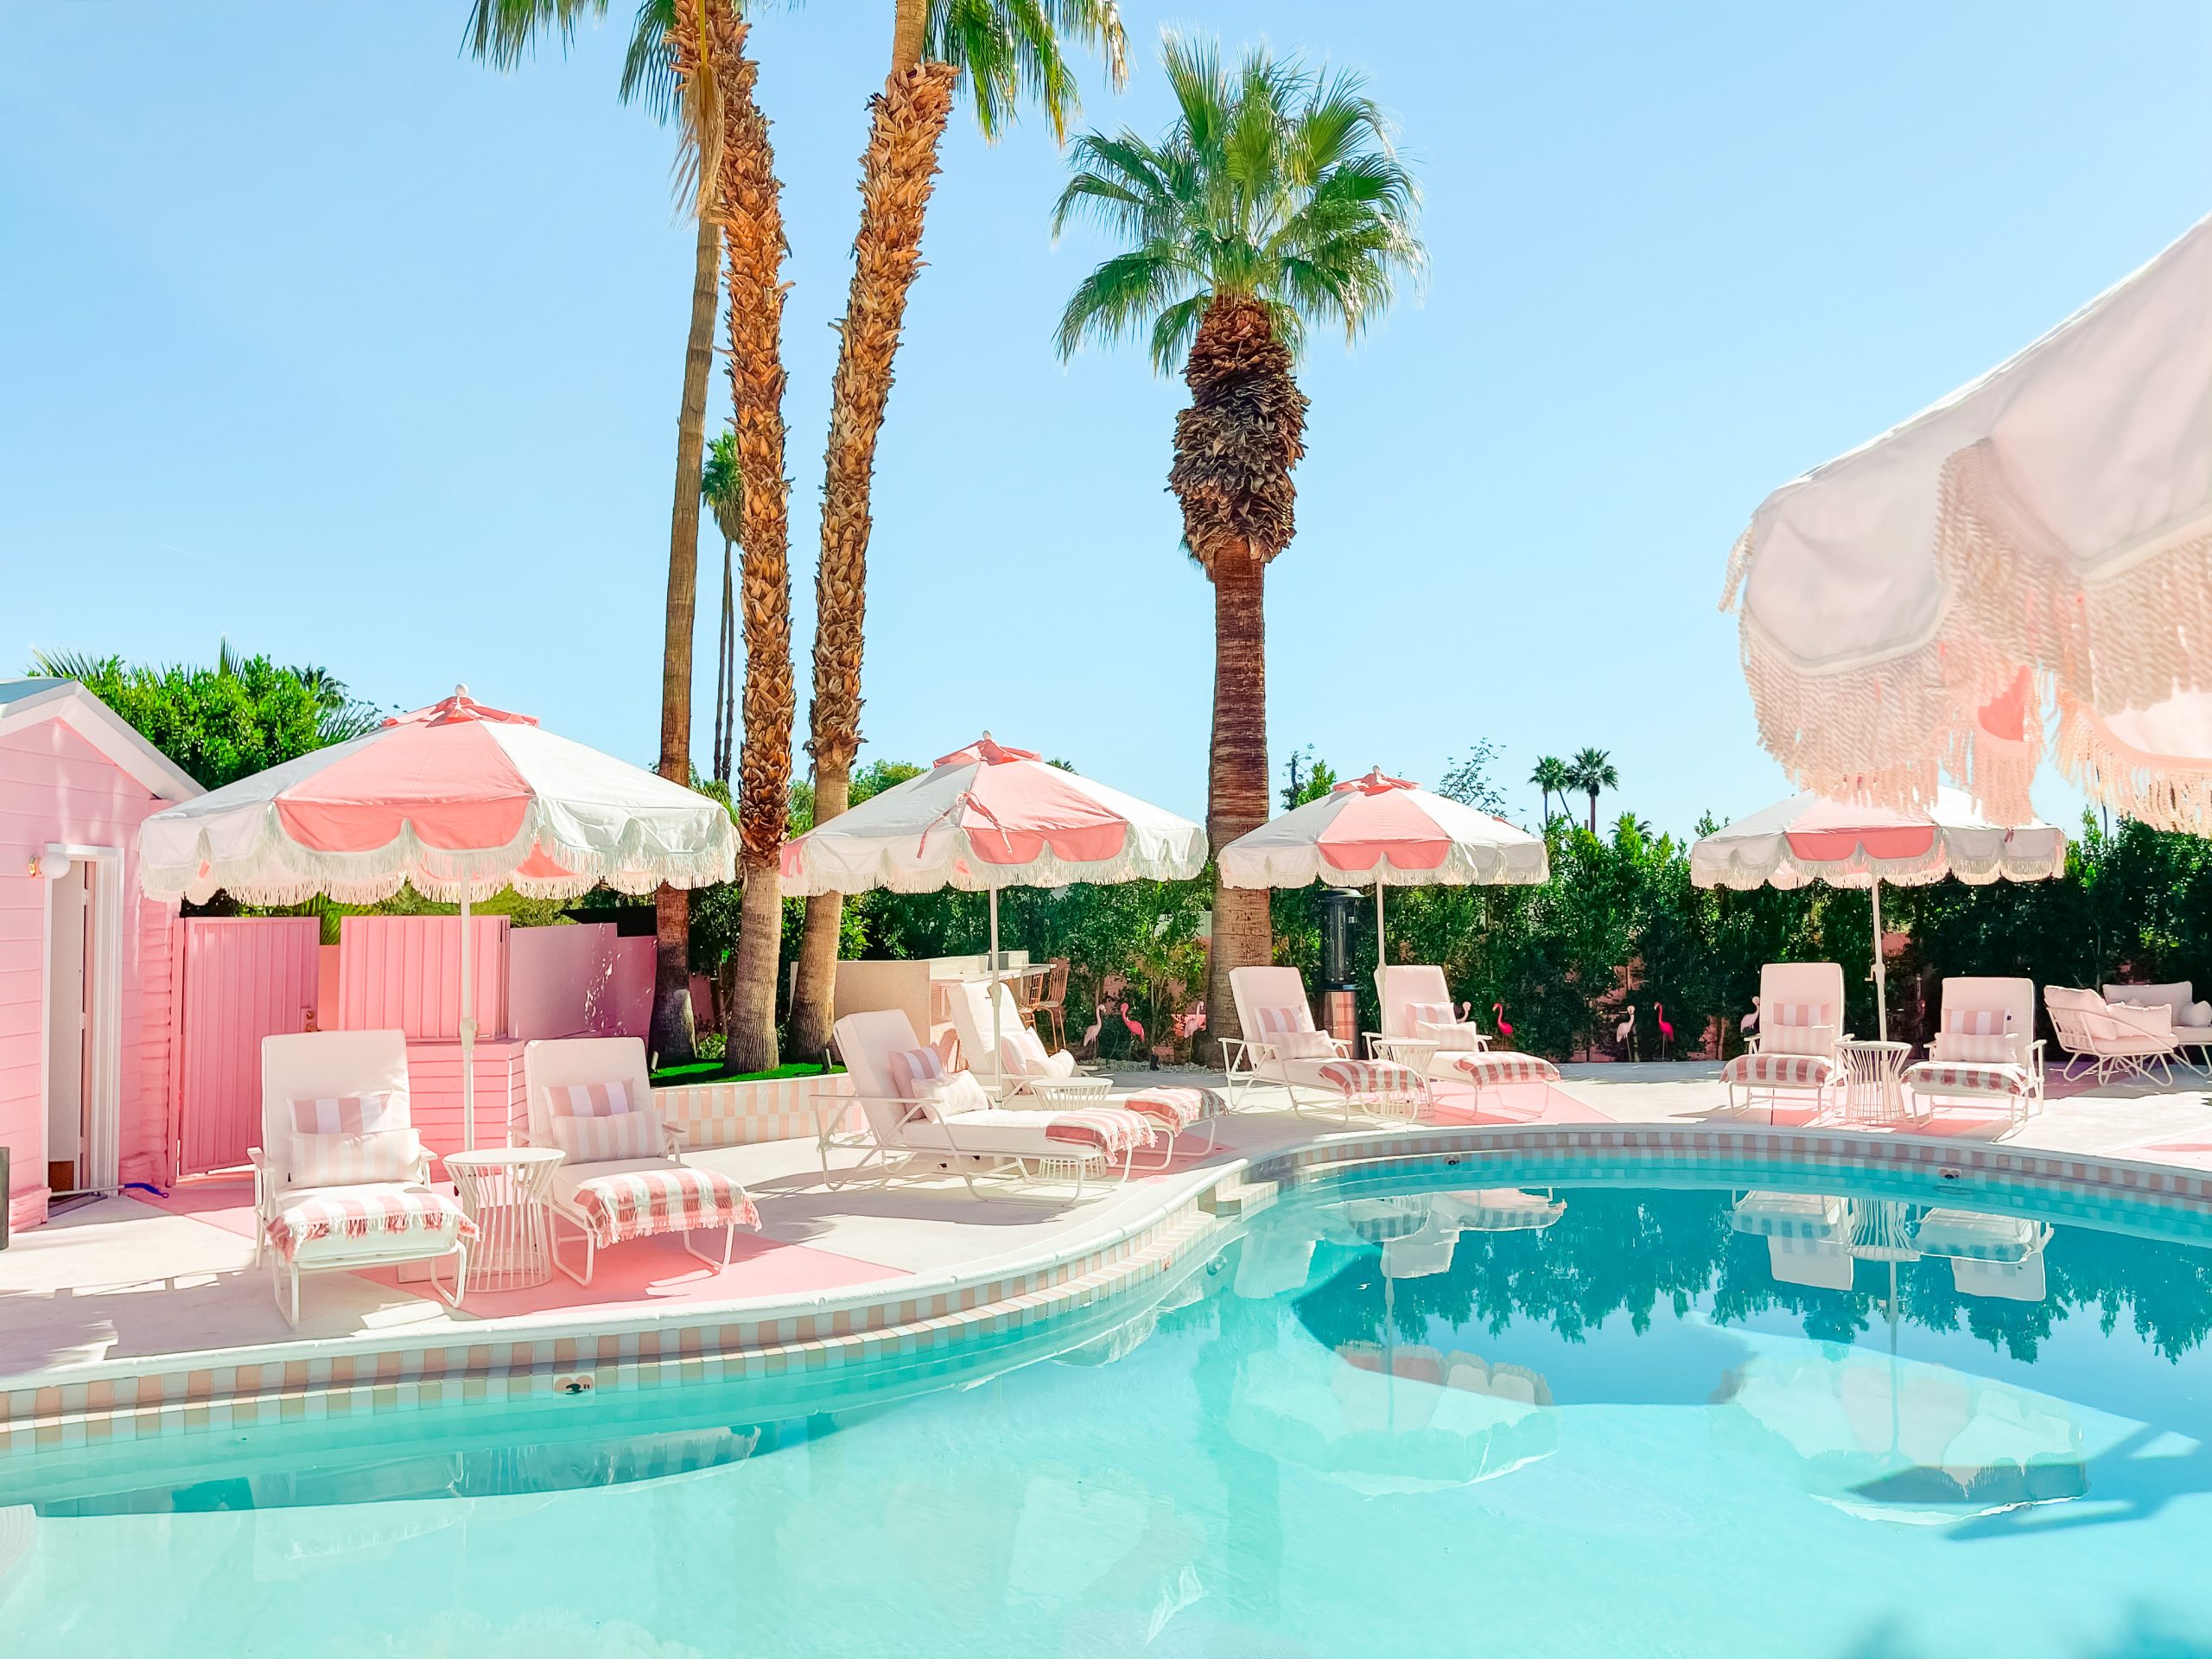 Barbie Takes California: A Dream Vacation for Fans Everywhere